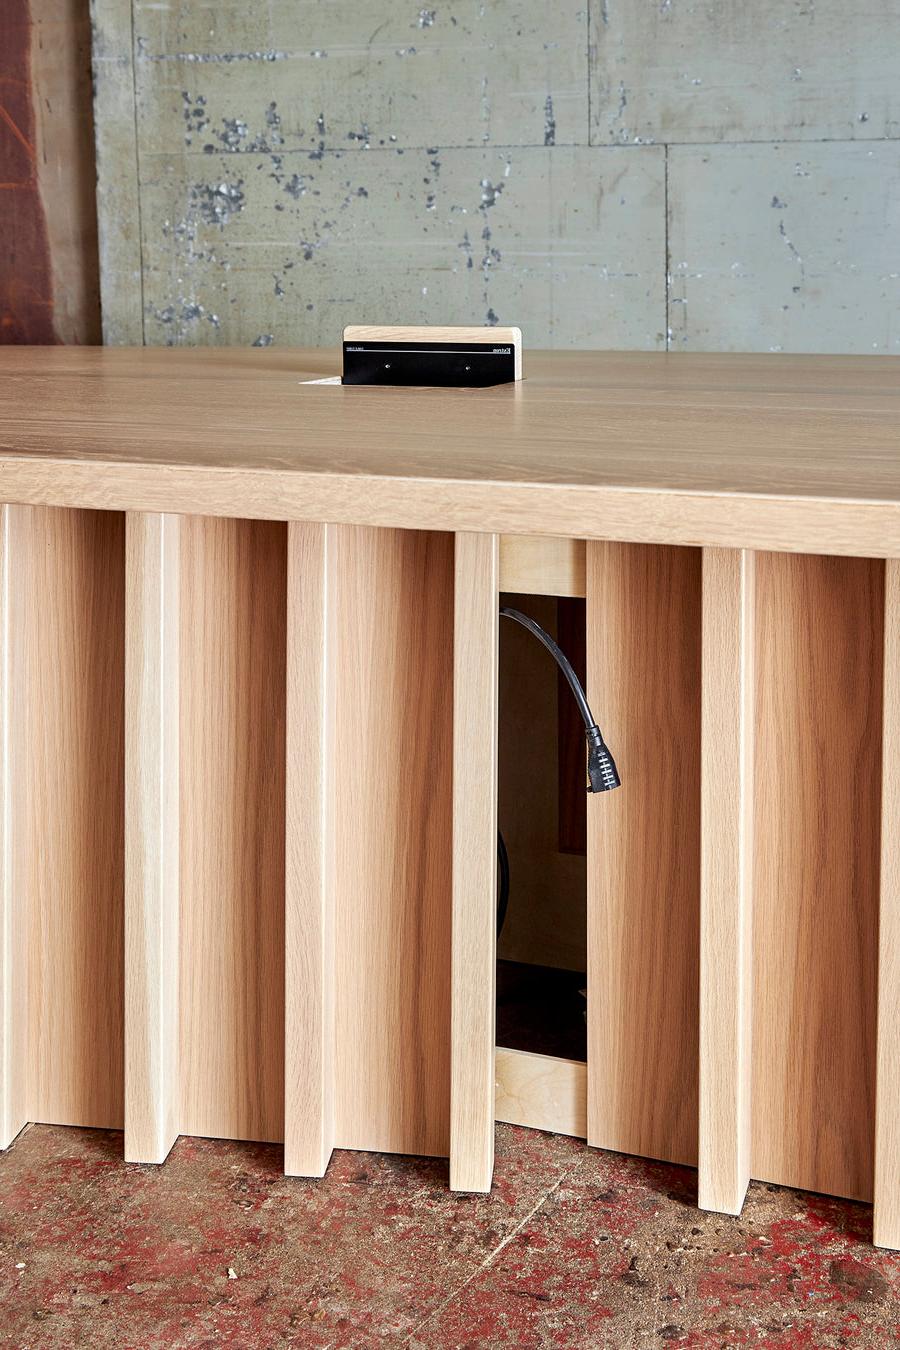 conference table removable wood panels to conceal power